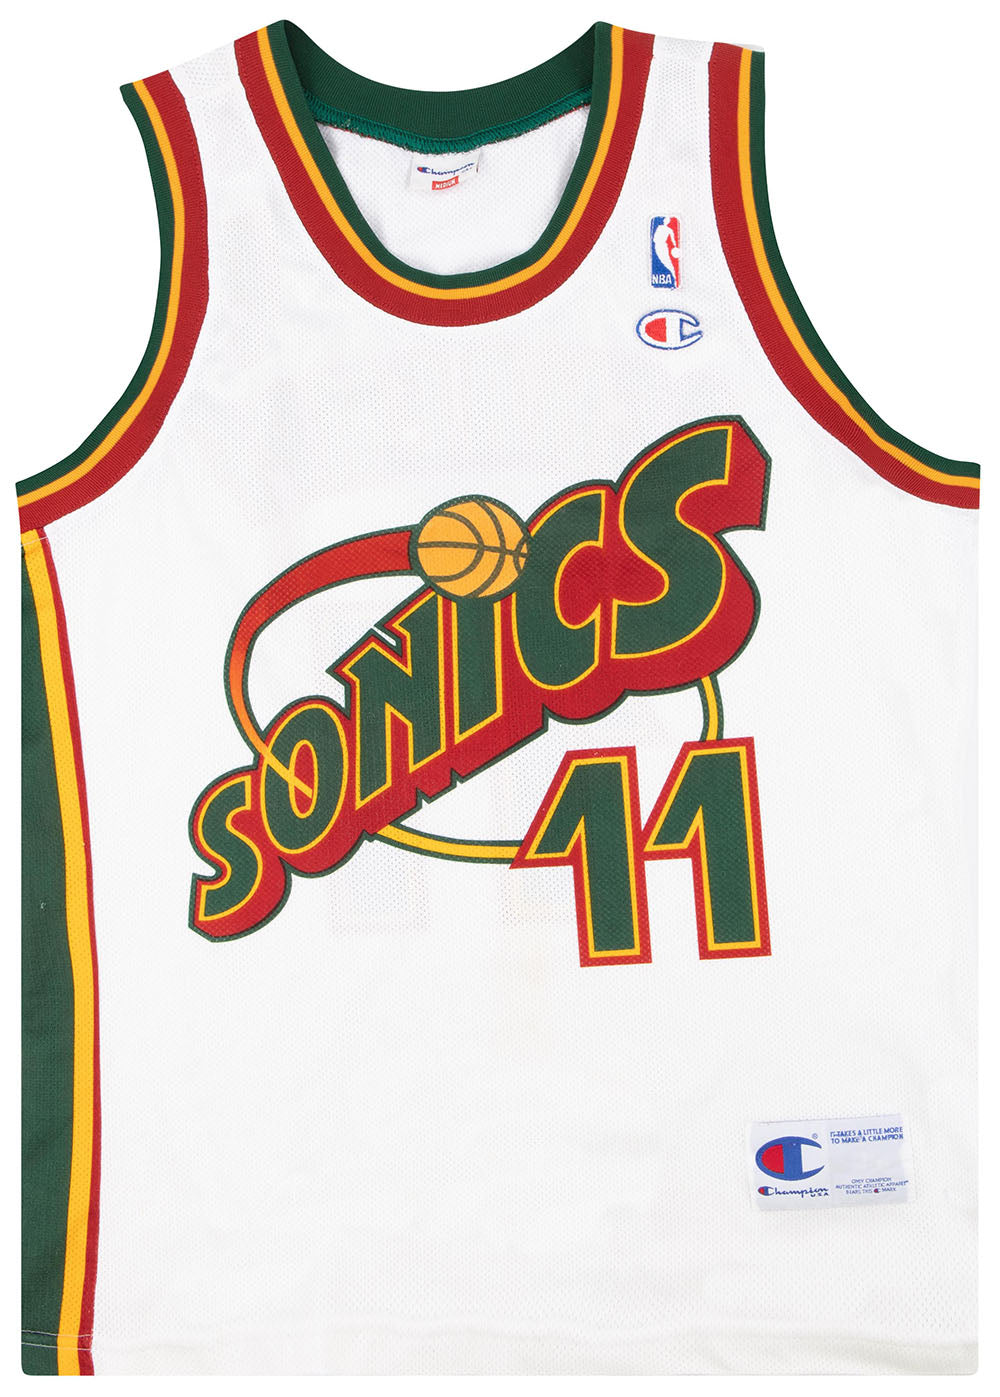 🏀 Detlef Schrempf Seattle Supersonics Jersey Size XL – The Throwback Store  🏀